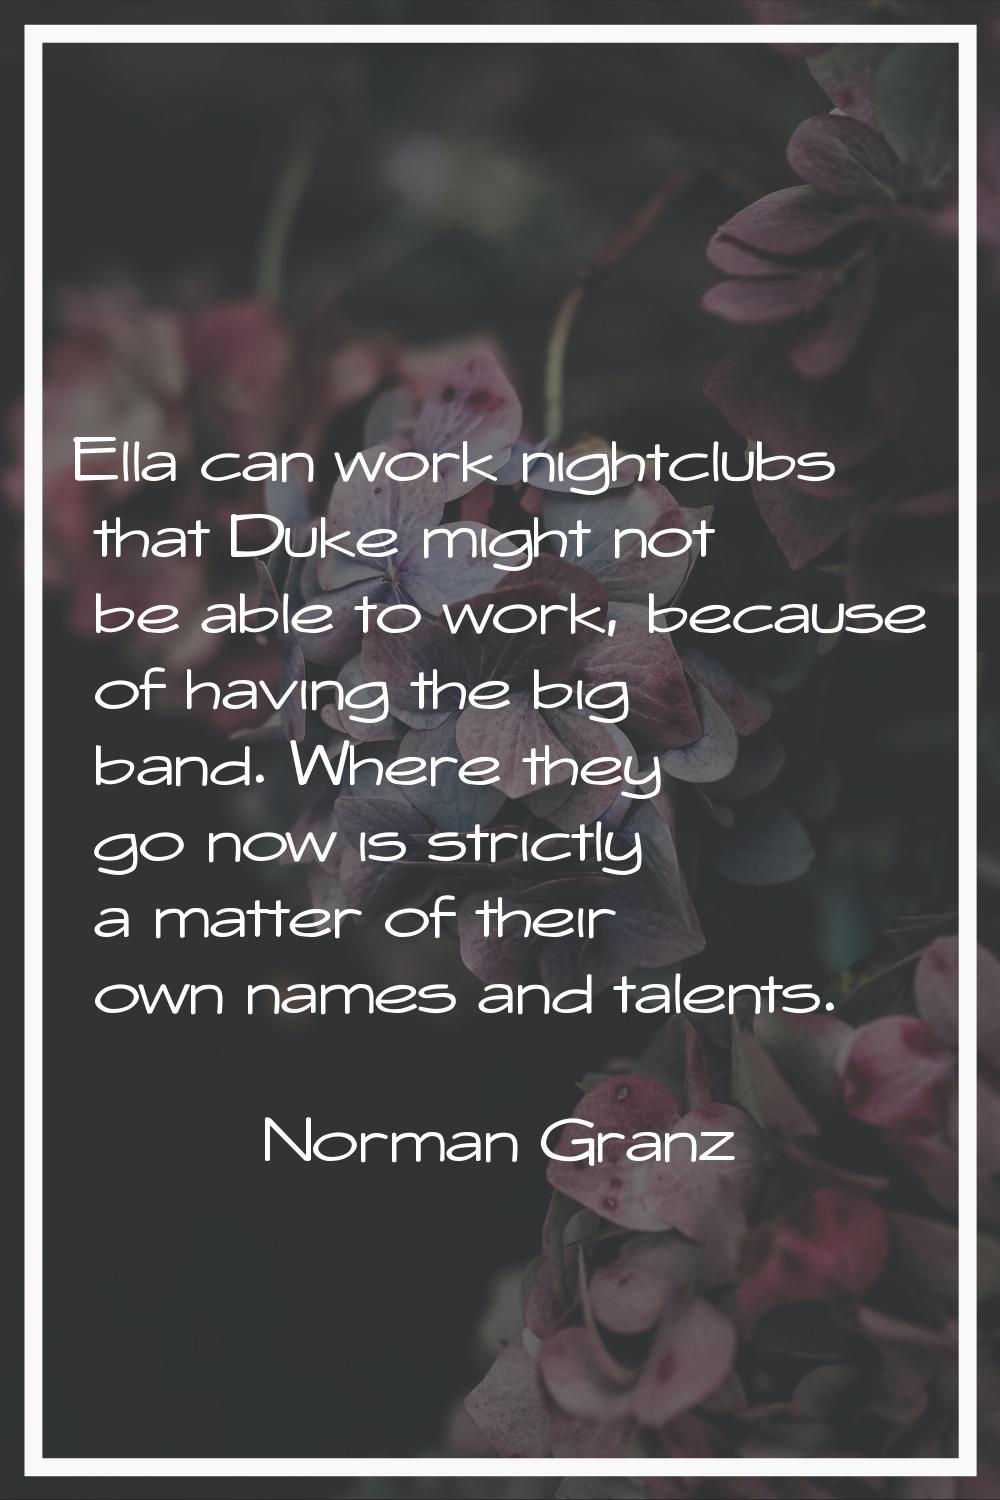 Ella can work nightclubs that Duke might not be able to work, because of having the big band. Where